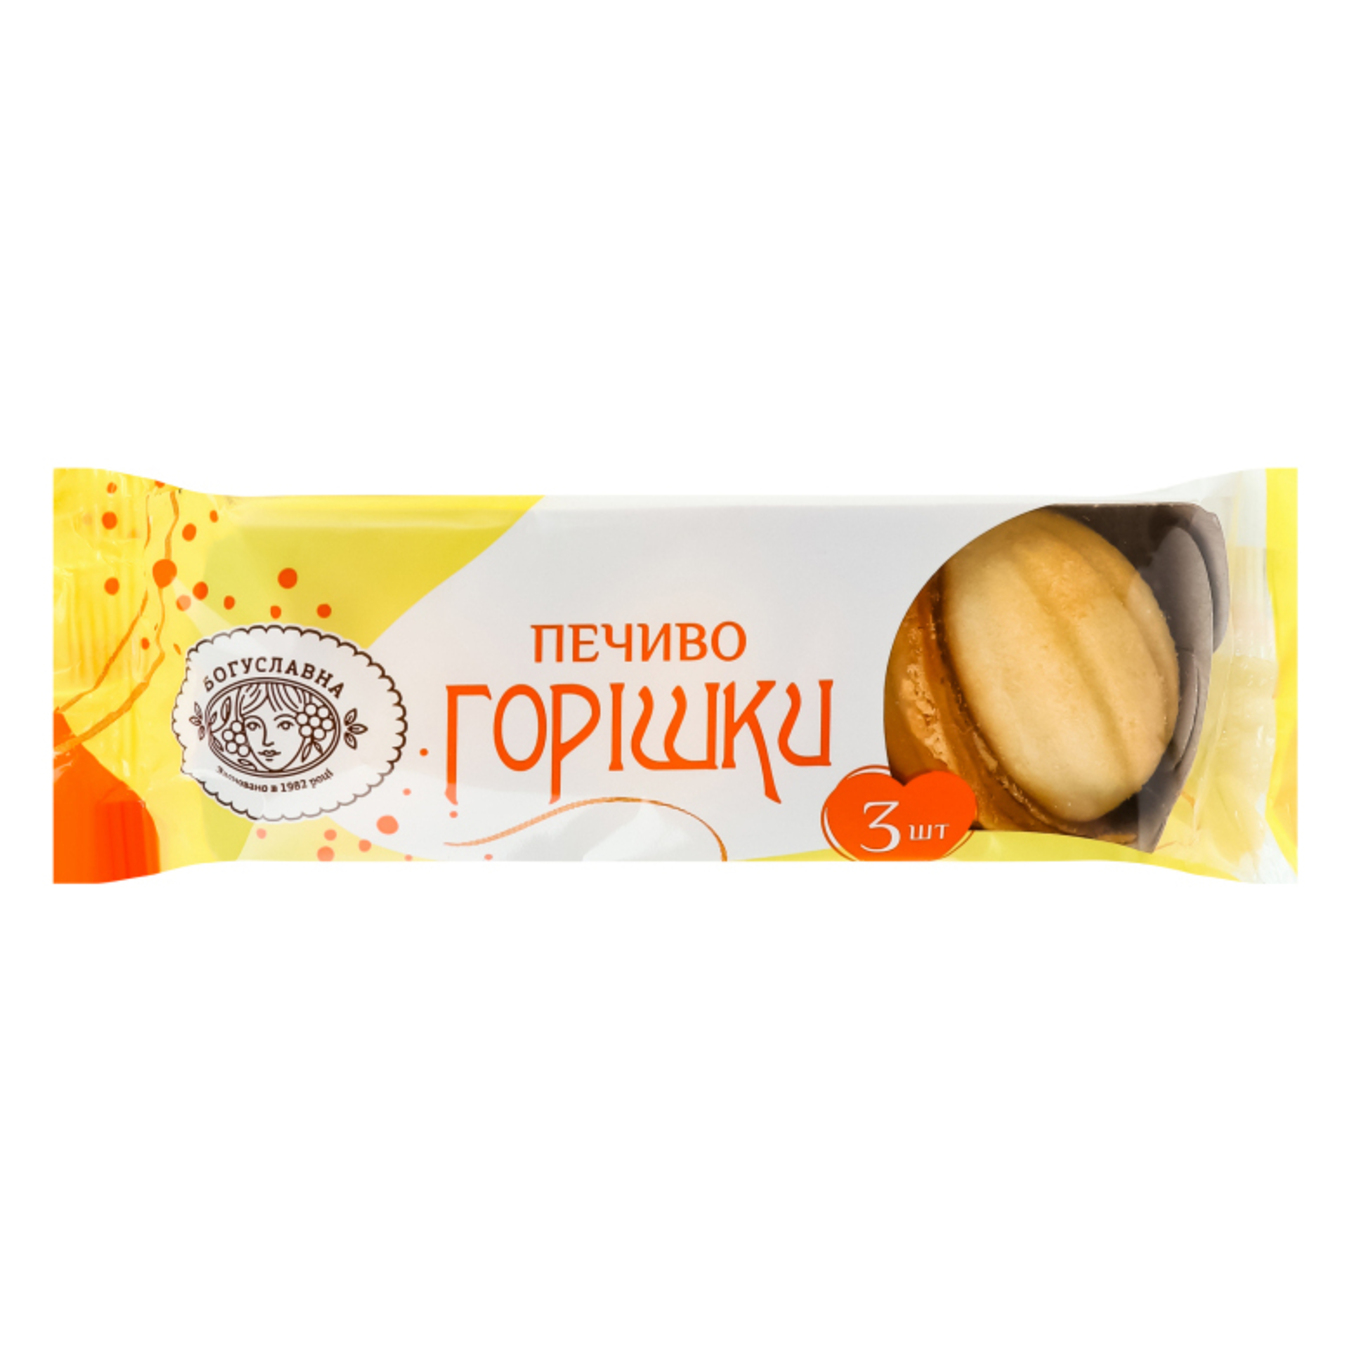 Bohuslavna cookies with peanut butter 75g